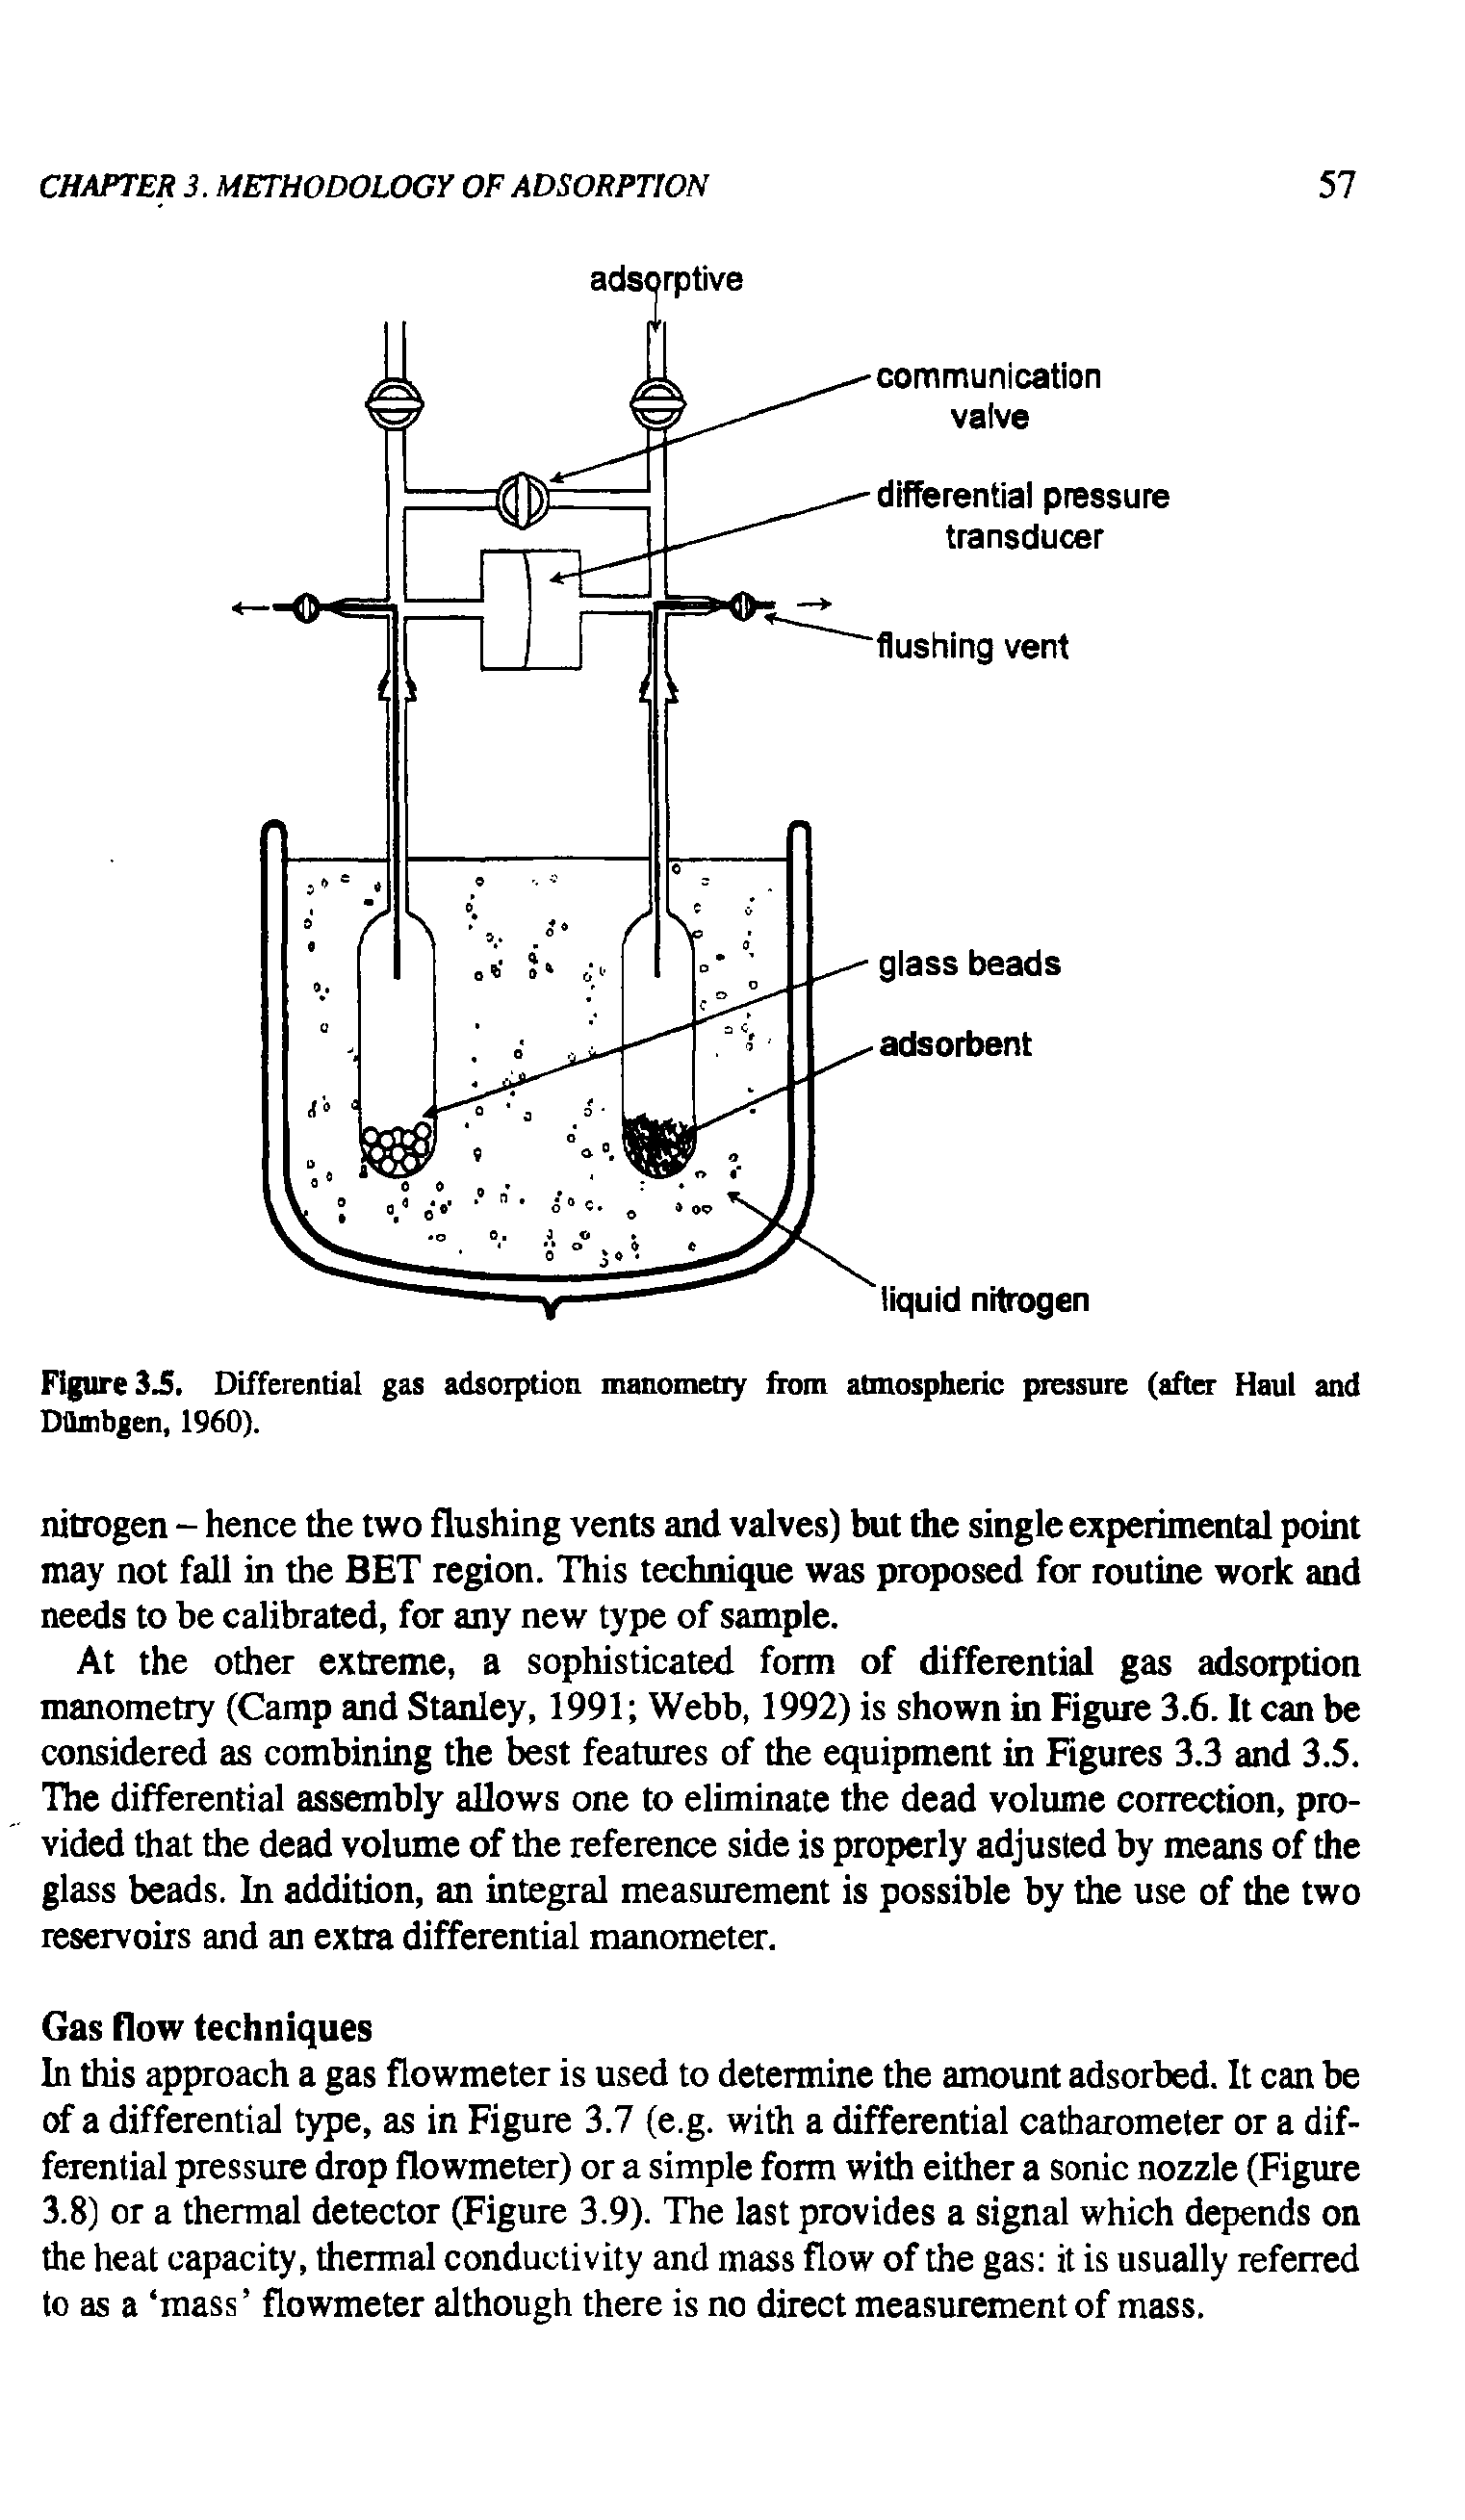 Figure 3.5. Differential gas adsorption manometry from atmospheric pressure (after Haul and Dflmbgen, 1960).